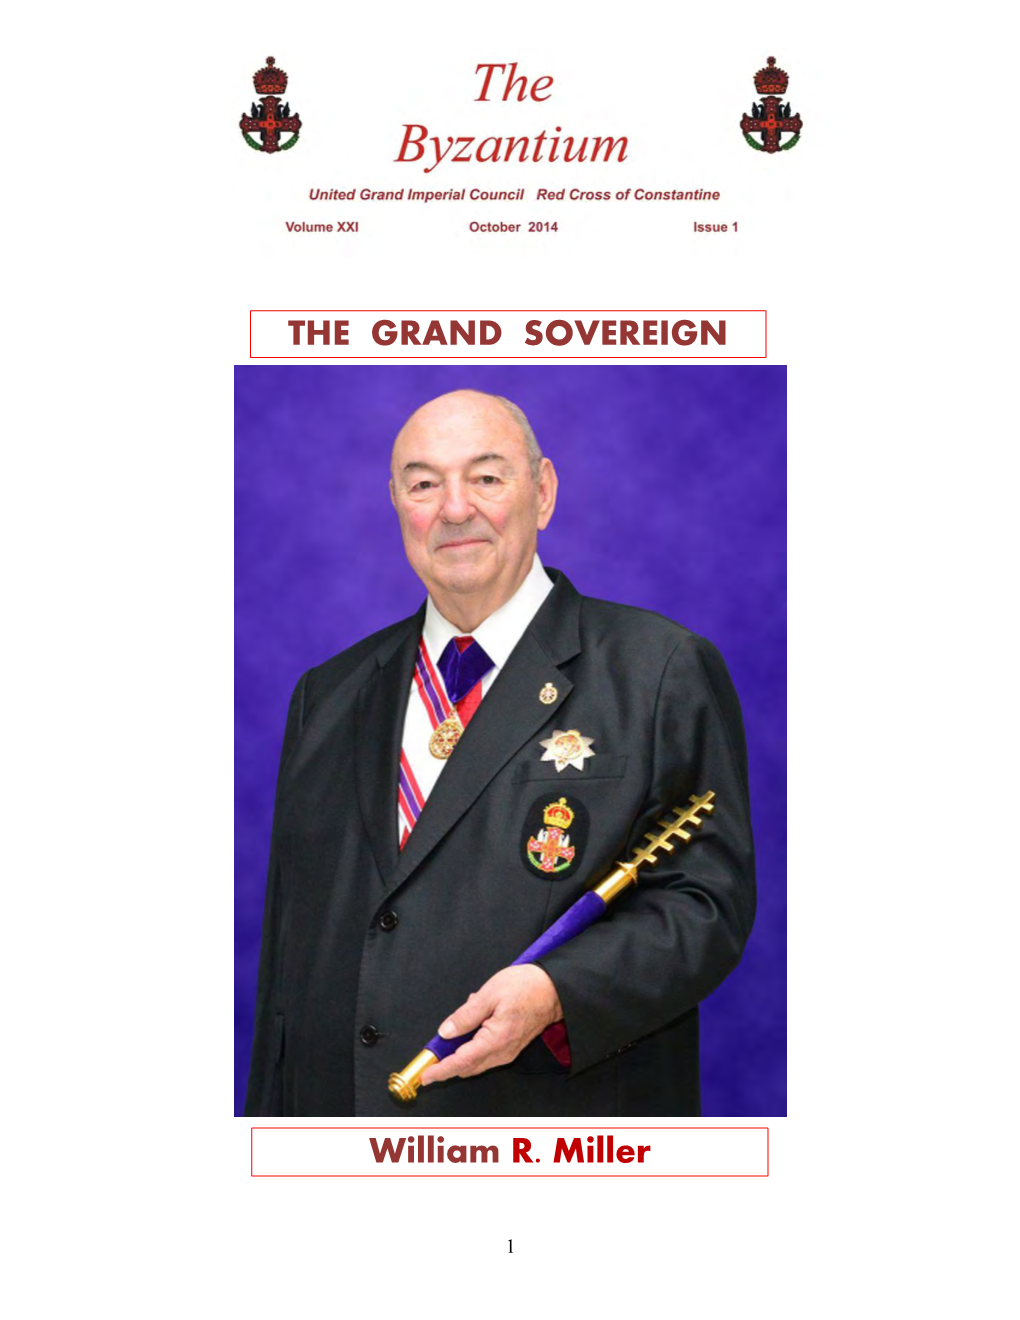 William R. Miller the GRAND SOVEREIGN